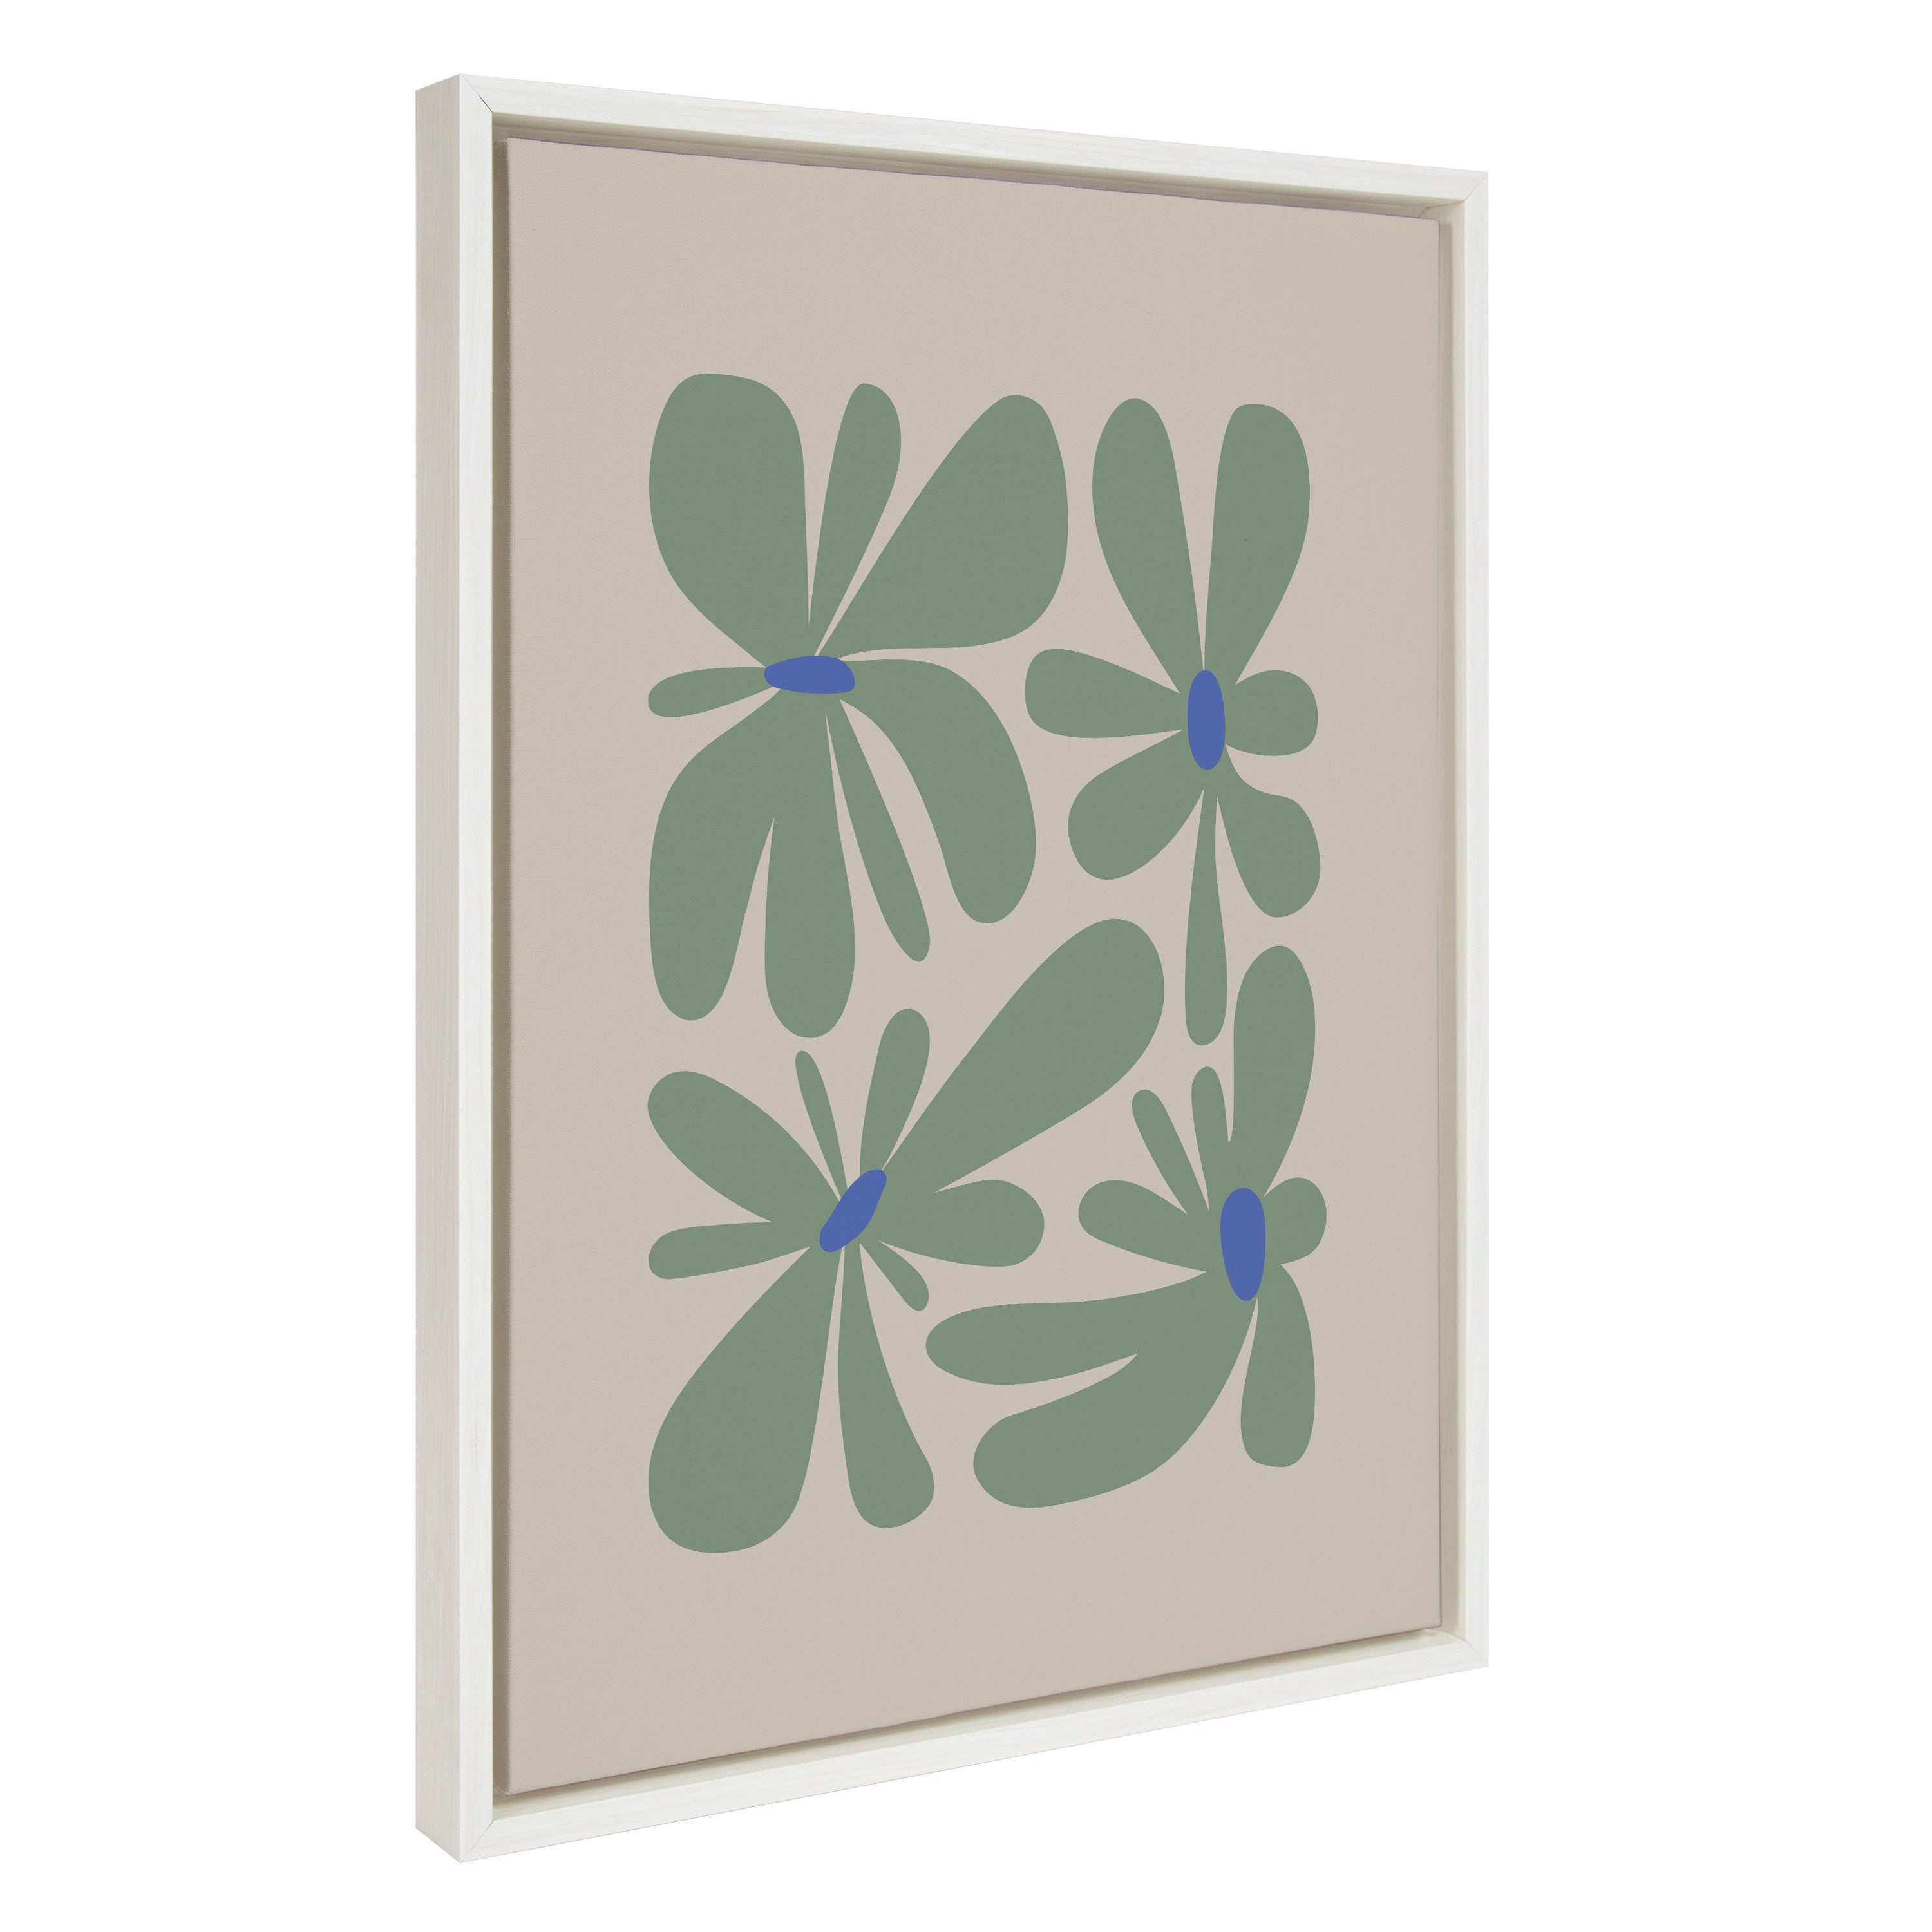 Sylvie Colorful Abstract Retro Floral Groovy Green Framed Canvas by The Creative Bunch Studio